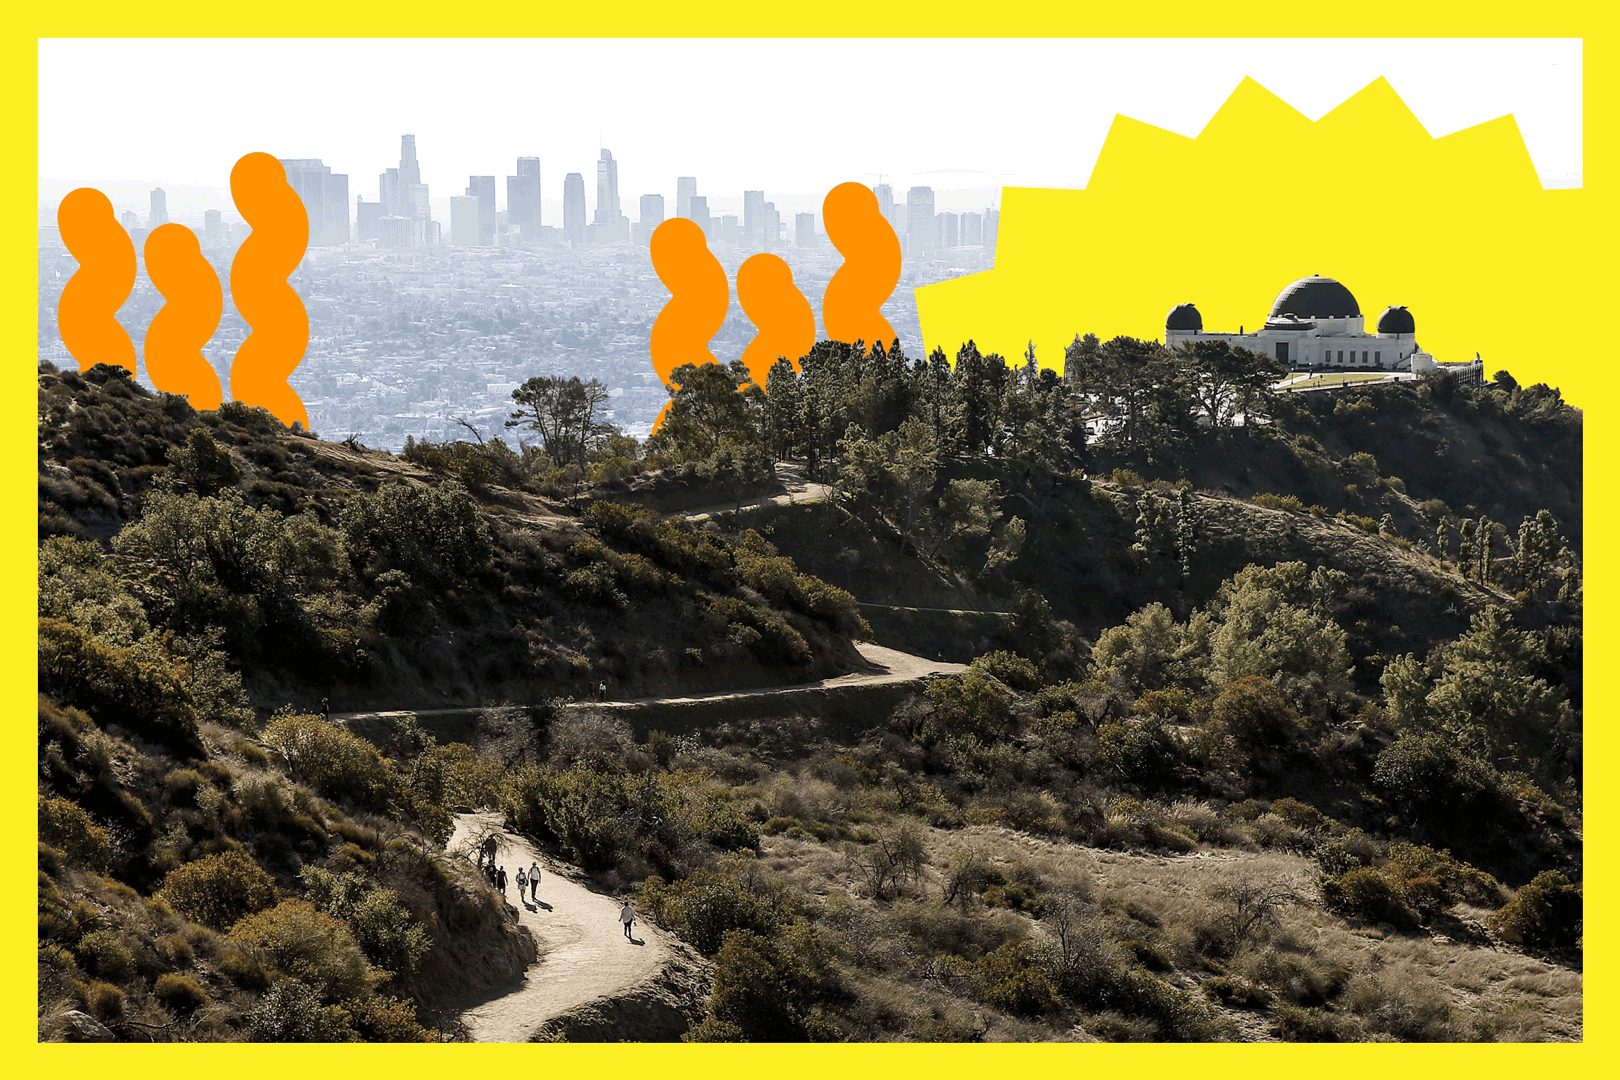 Several trails feed into the Mt Hollywood Trail leading to the peak of Mount Hollywood at 1,625 ft